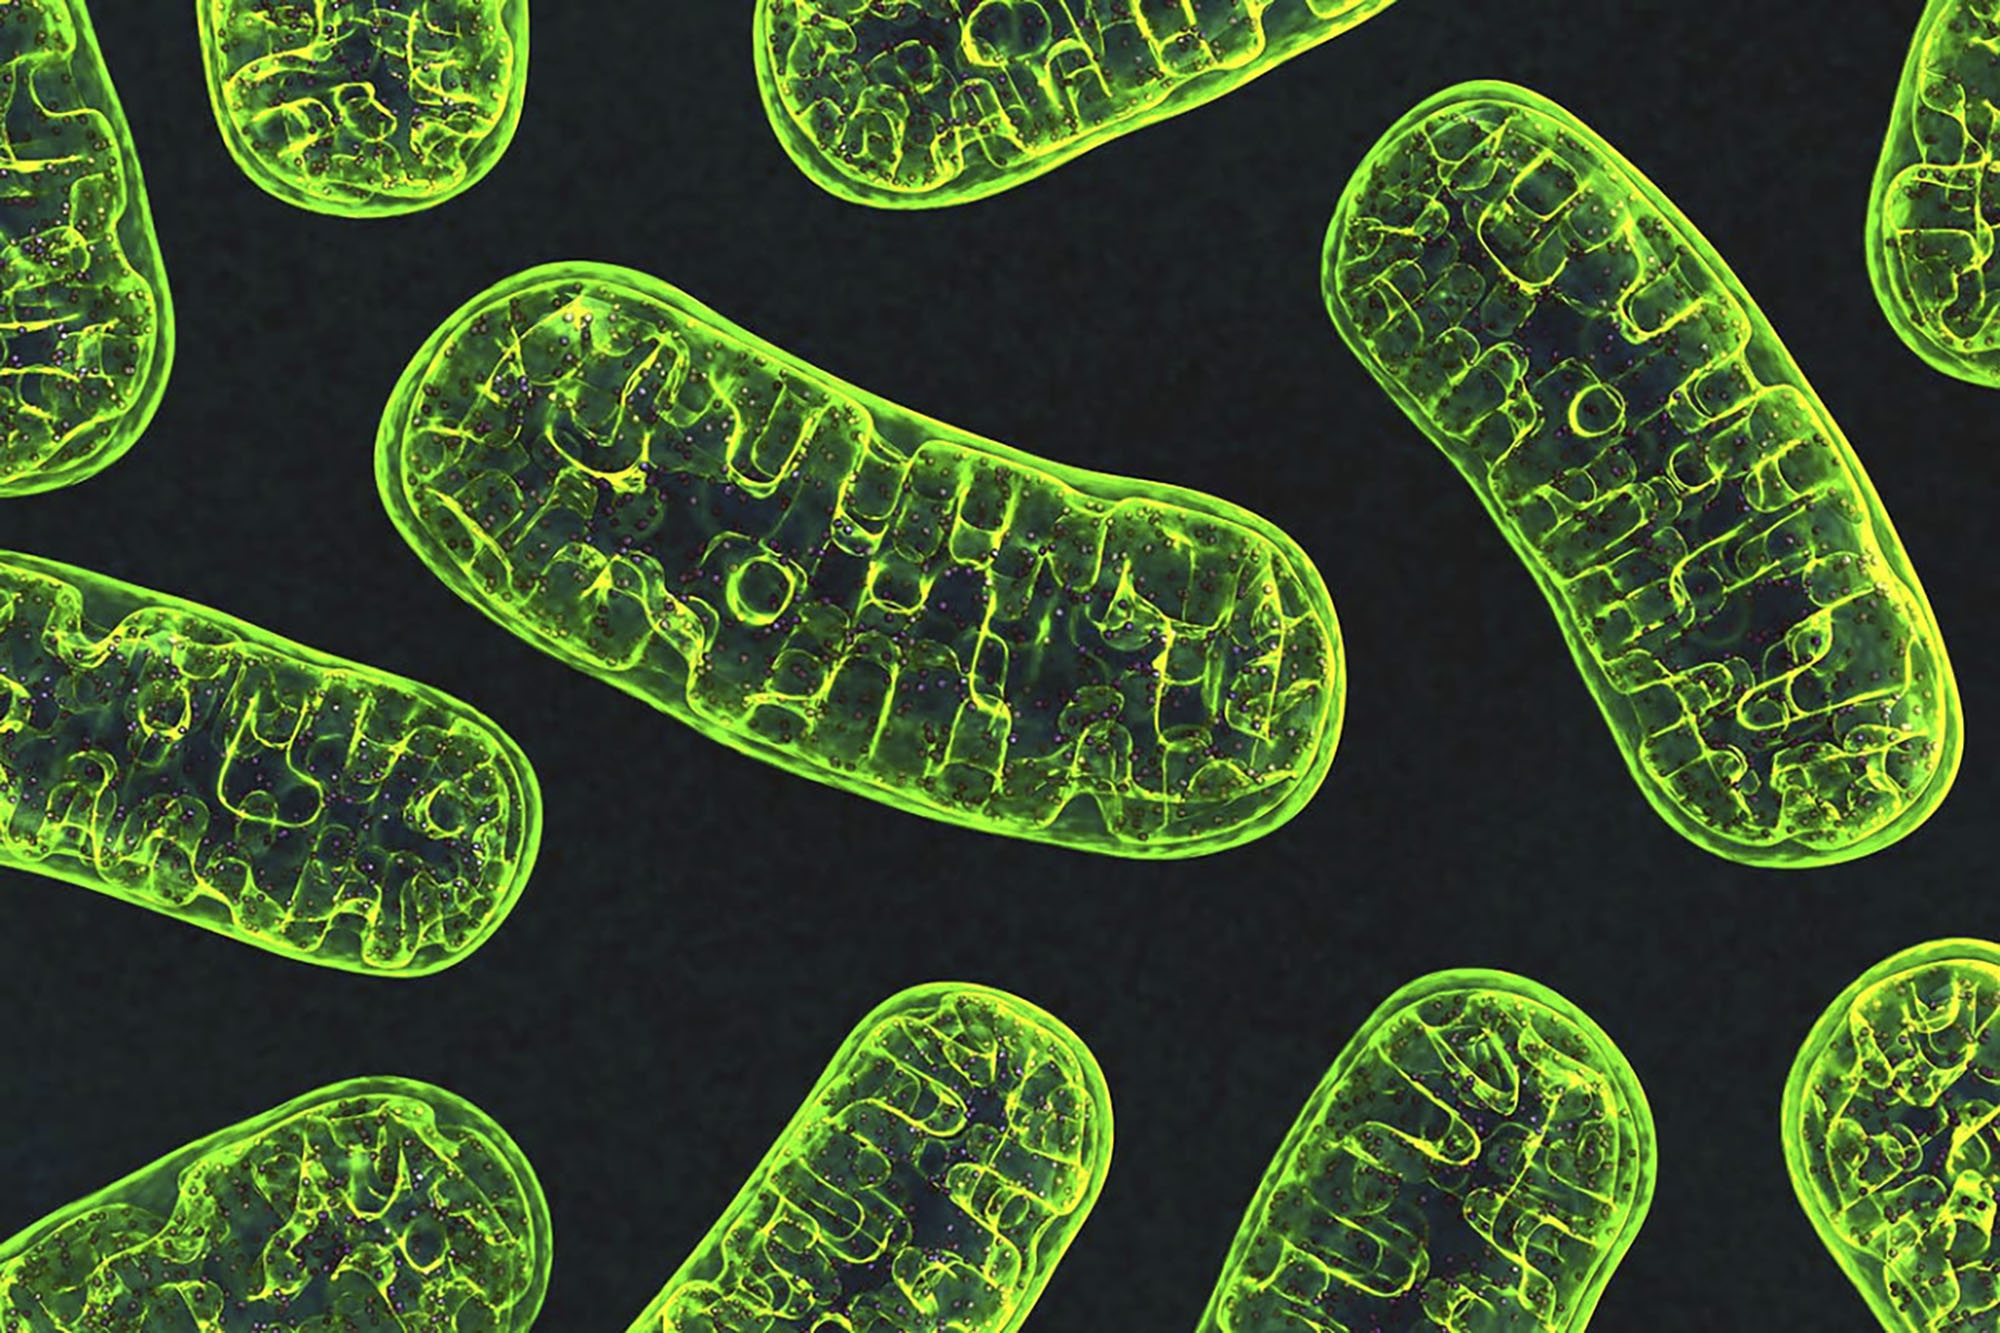 Green Mitochondria on a black background